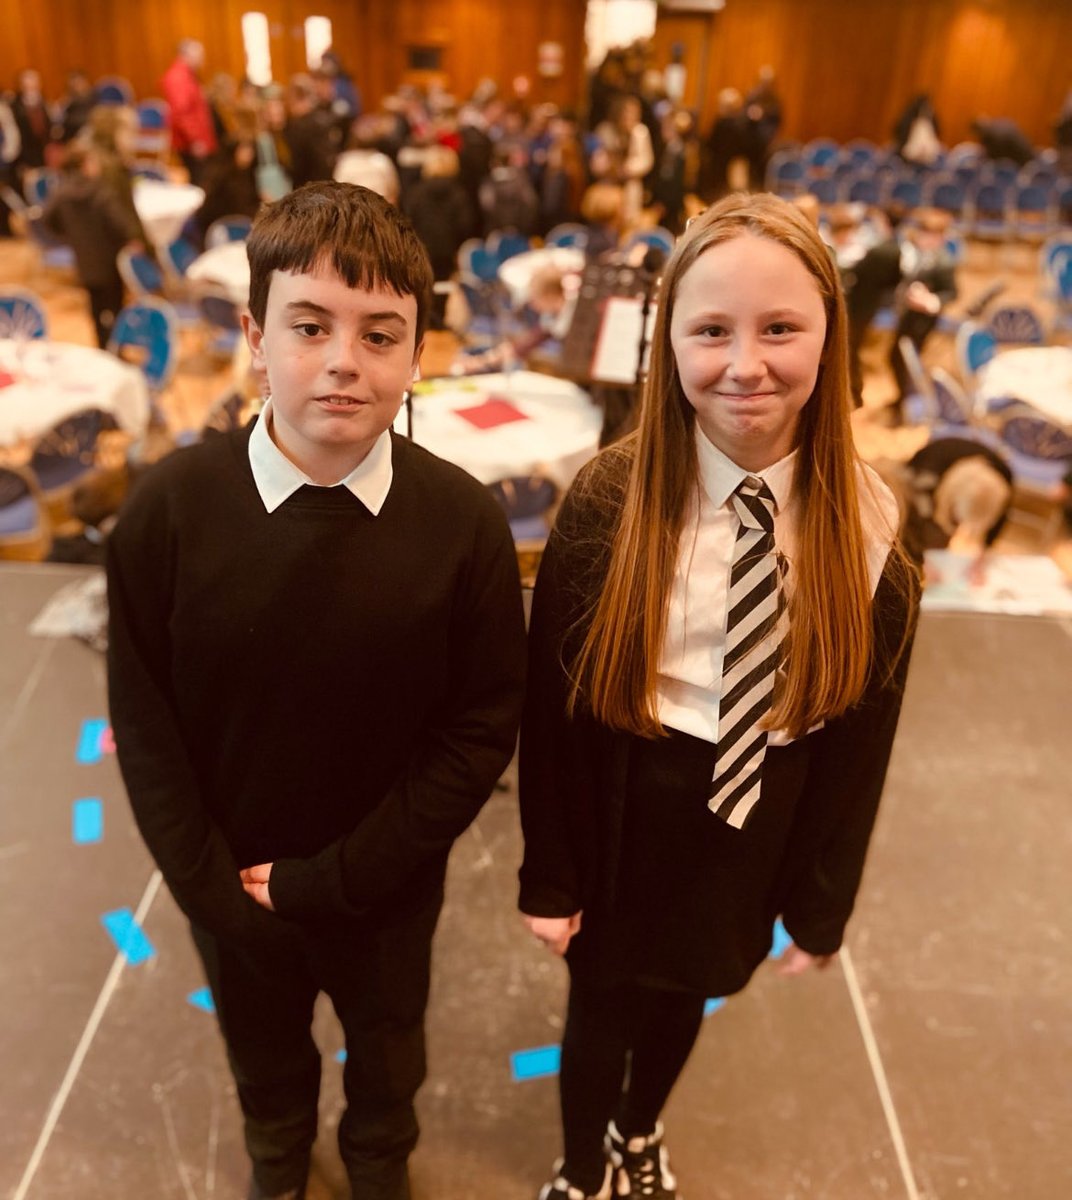 P7s Evie & Callum represented #teamannbank at the 22nd Schools’ Burns Supper at Ayr Town Hall today, hosted by Alloway Burns Club. They sang their rendition of Caledonia/Wild Mountain Thyme absolutely beautifully, and enjoyed their afternoon of Scottish entertainment! 🏴󠁧󠁢󠁳󠁣󠁴󠁿🎤🎼🎭🤩